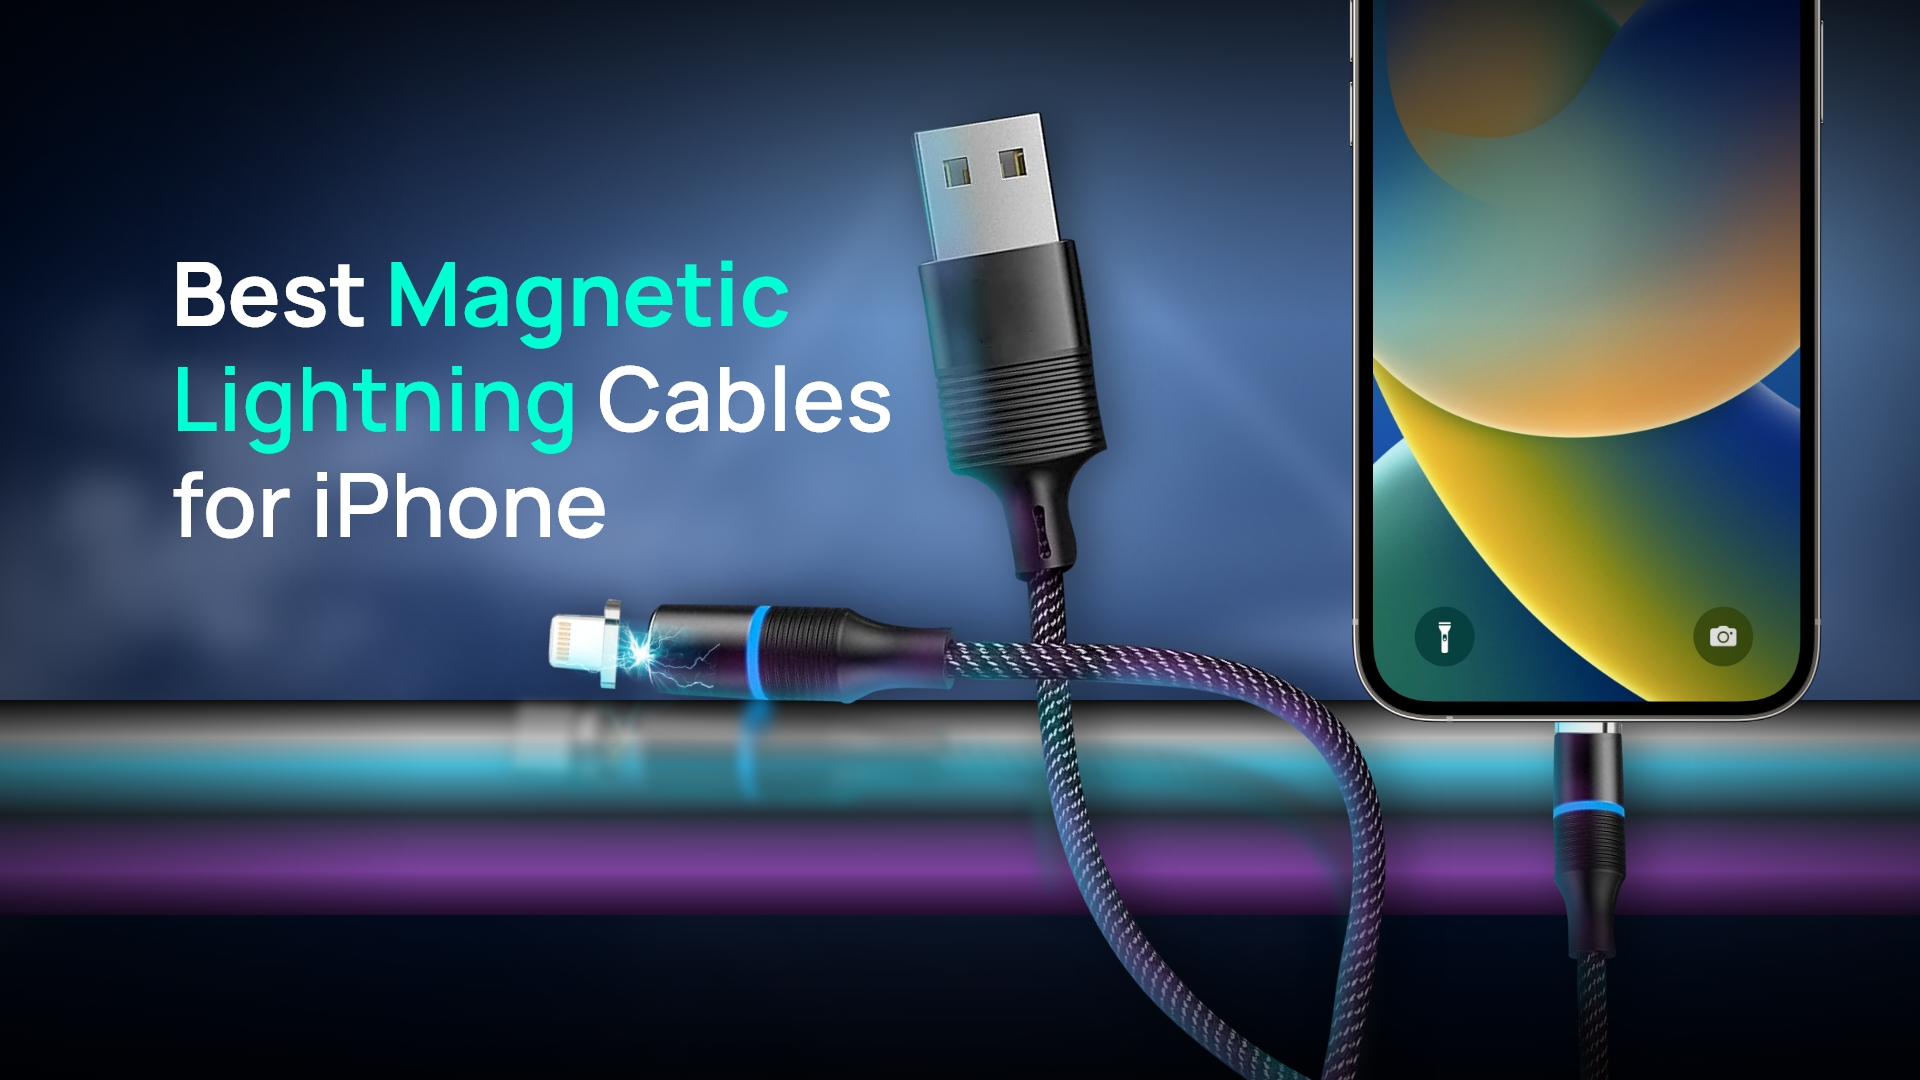 13 best magnetic lightning cables for iPhone in 2022